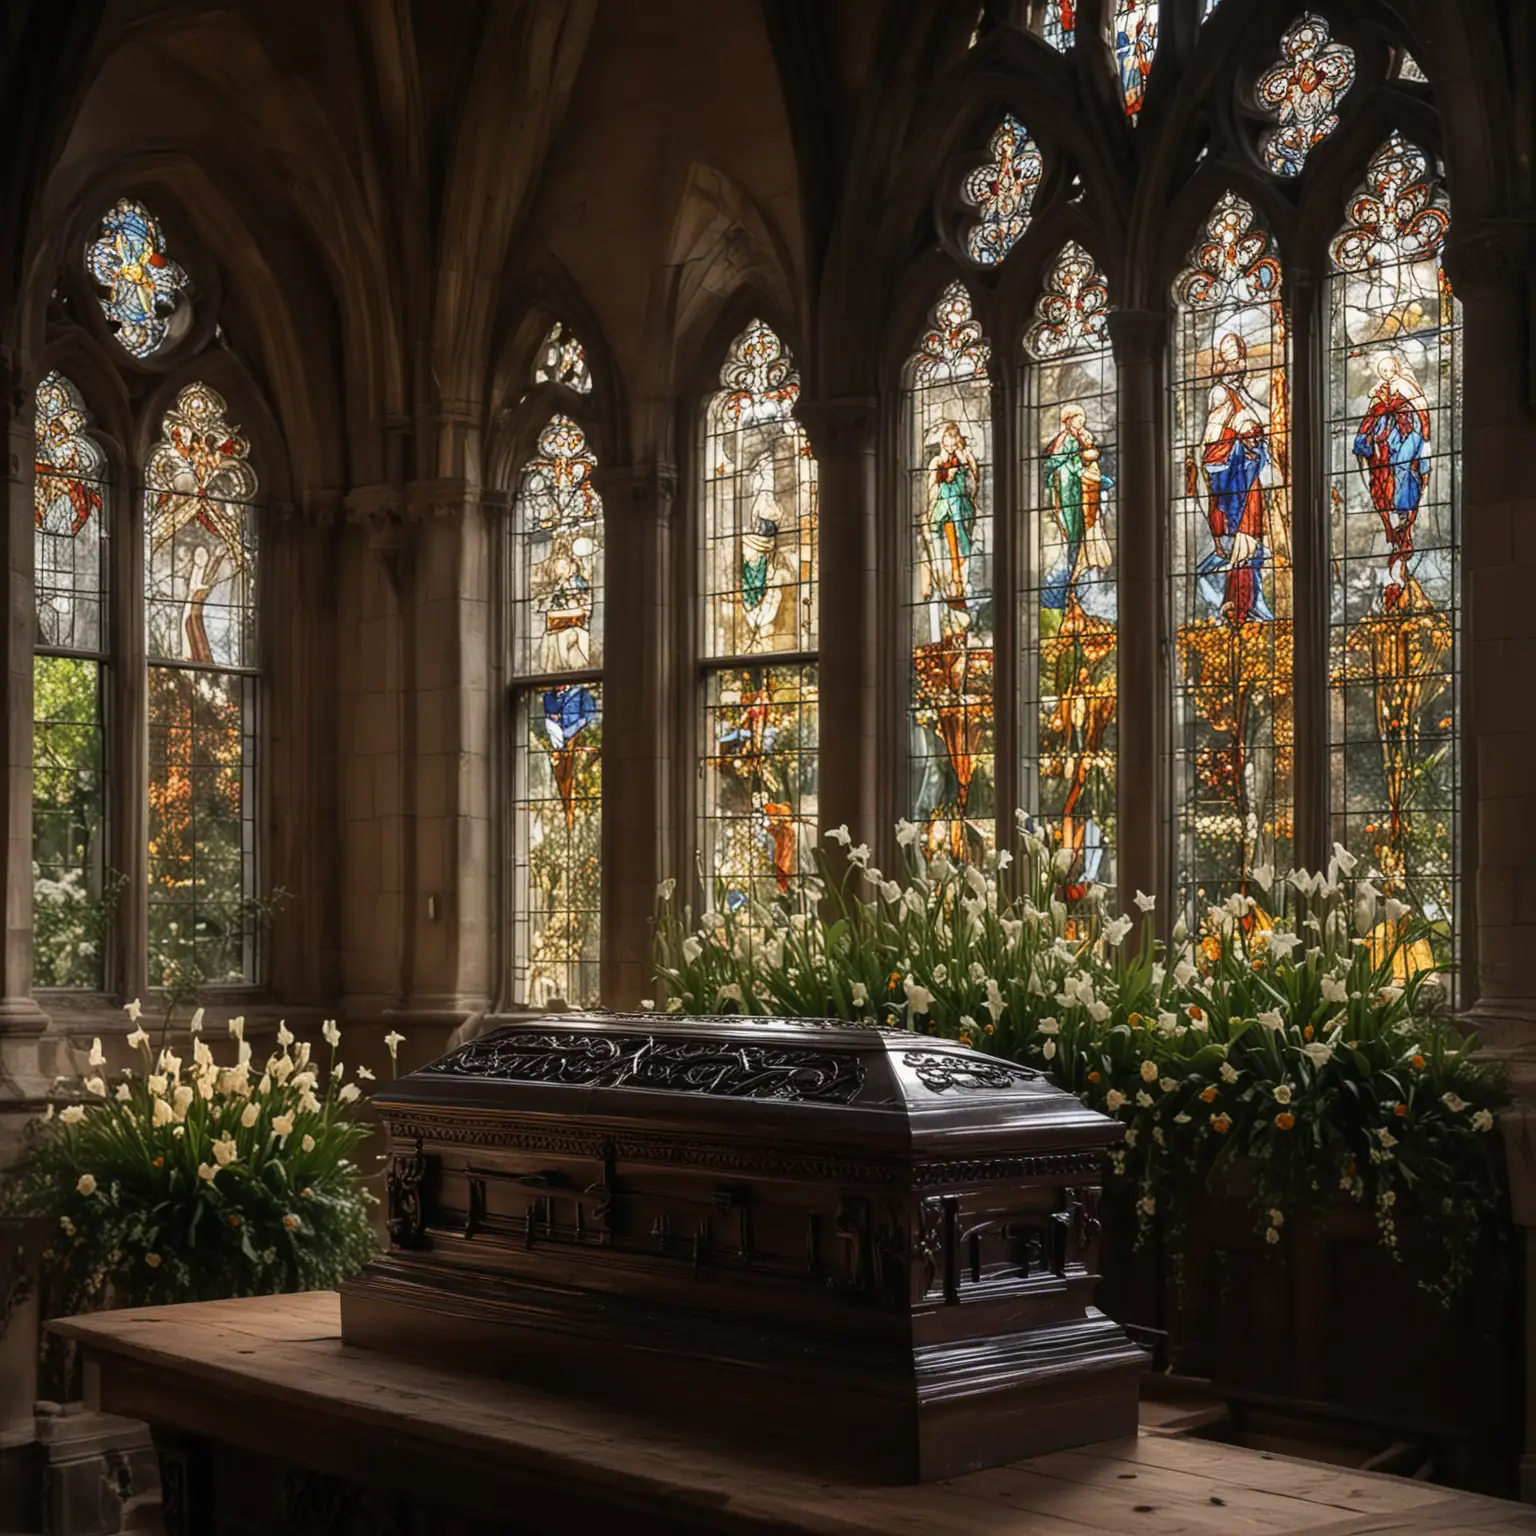 one source of light gothic beautiful church, in the foreground stands a dark beautiful coffin, on the coffin lies a few sprigs of lilies, in the background high oak windows with stained glass windows, bokeh background